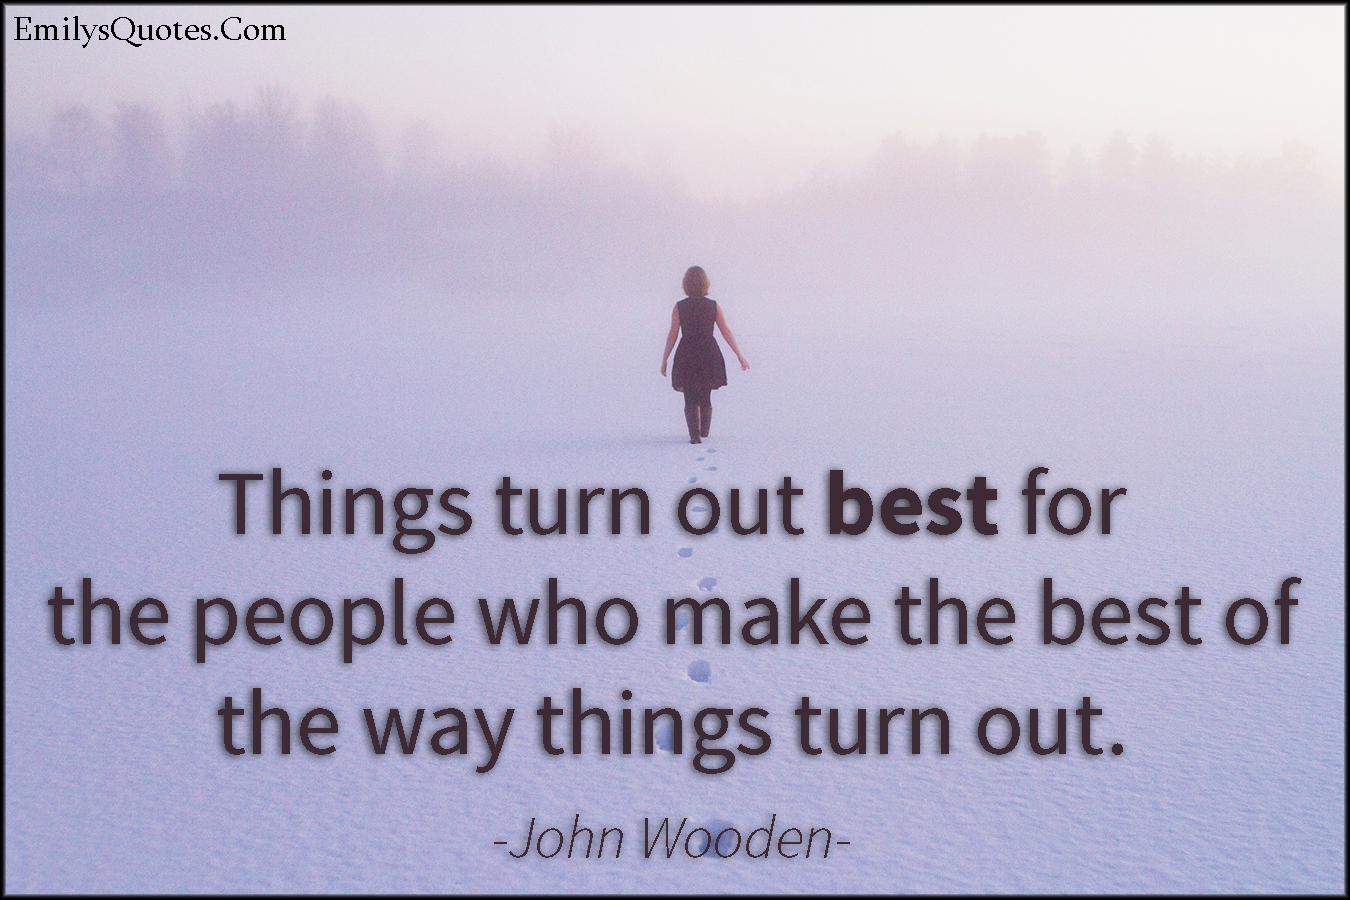 Things turn out best for the people who make the best of the way things turn out